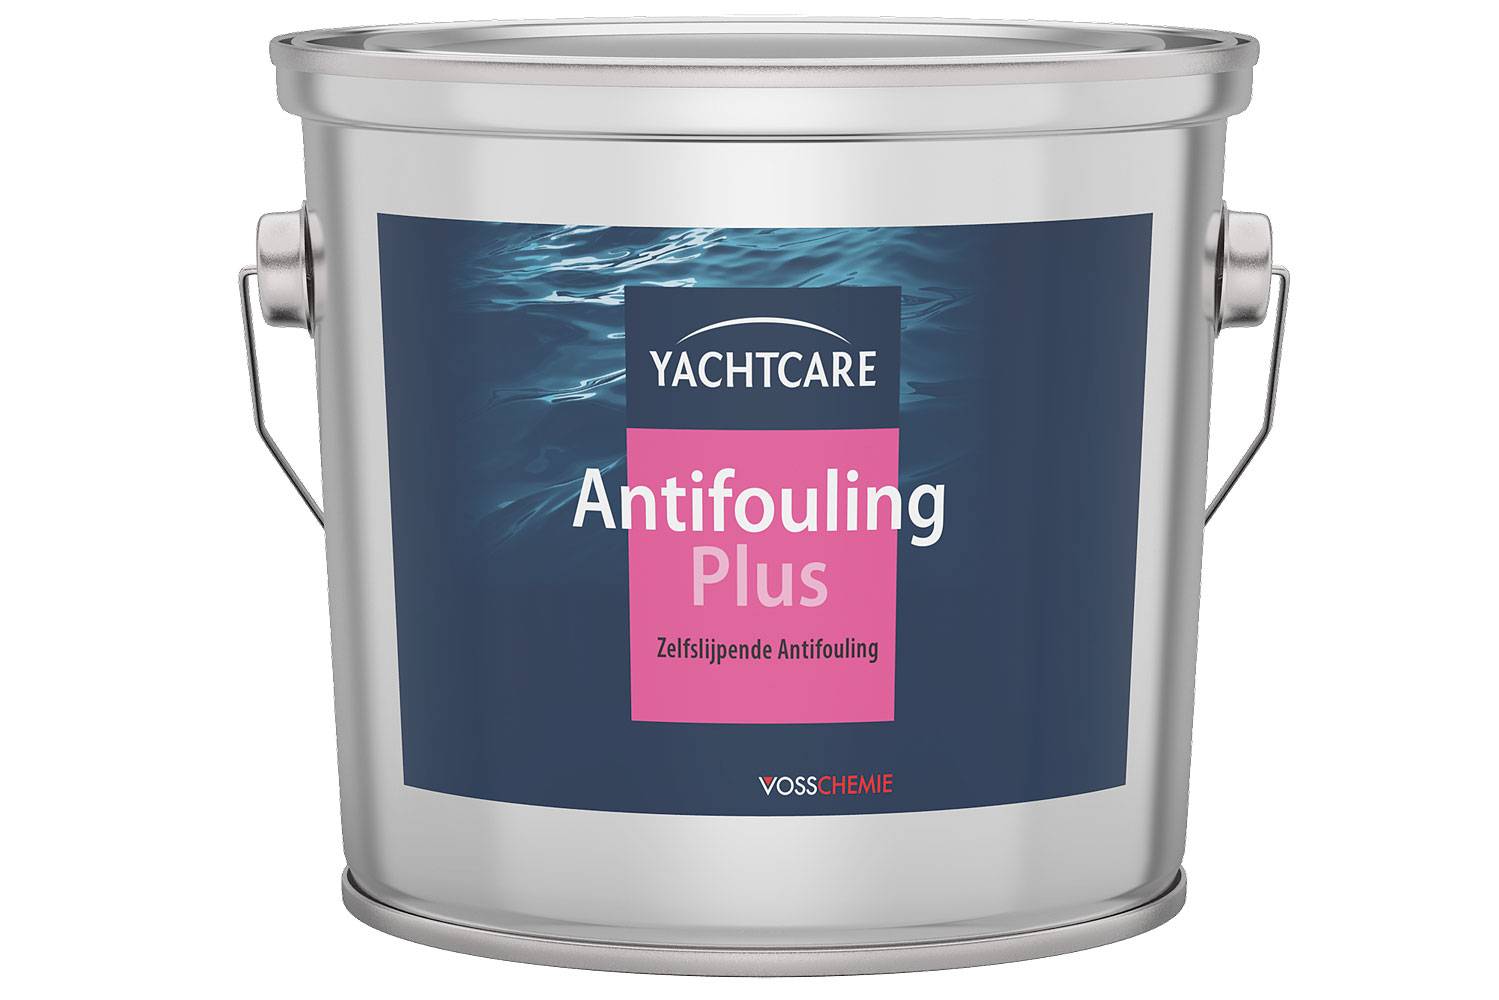 Yachtcare Antifouling Plus Approval Netherlands